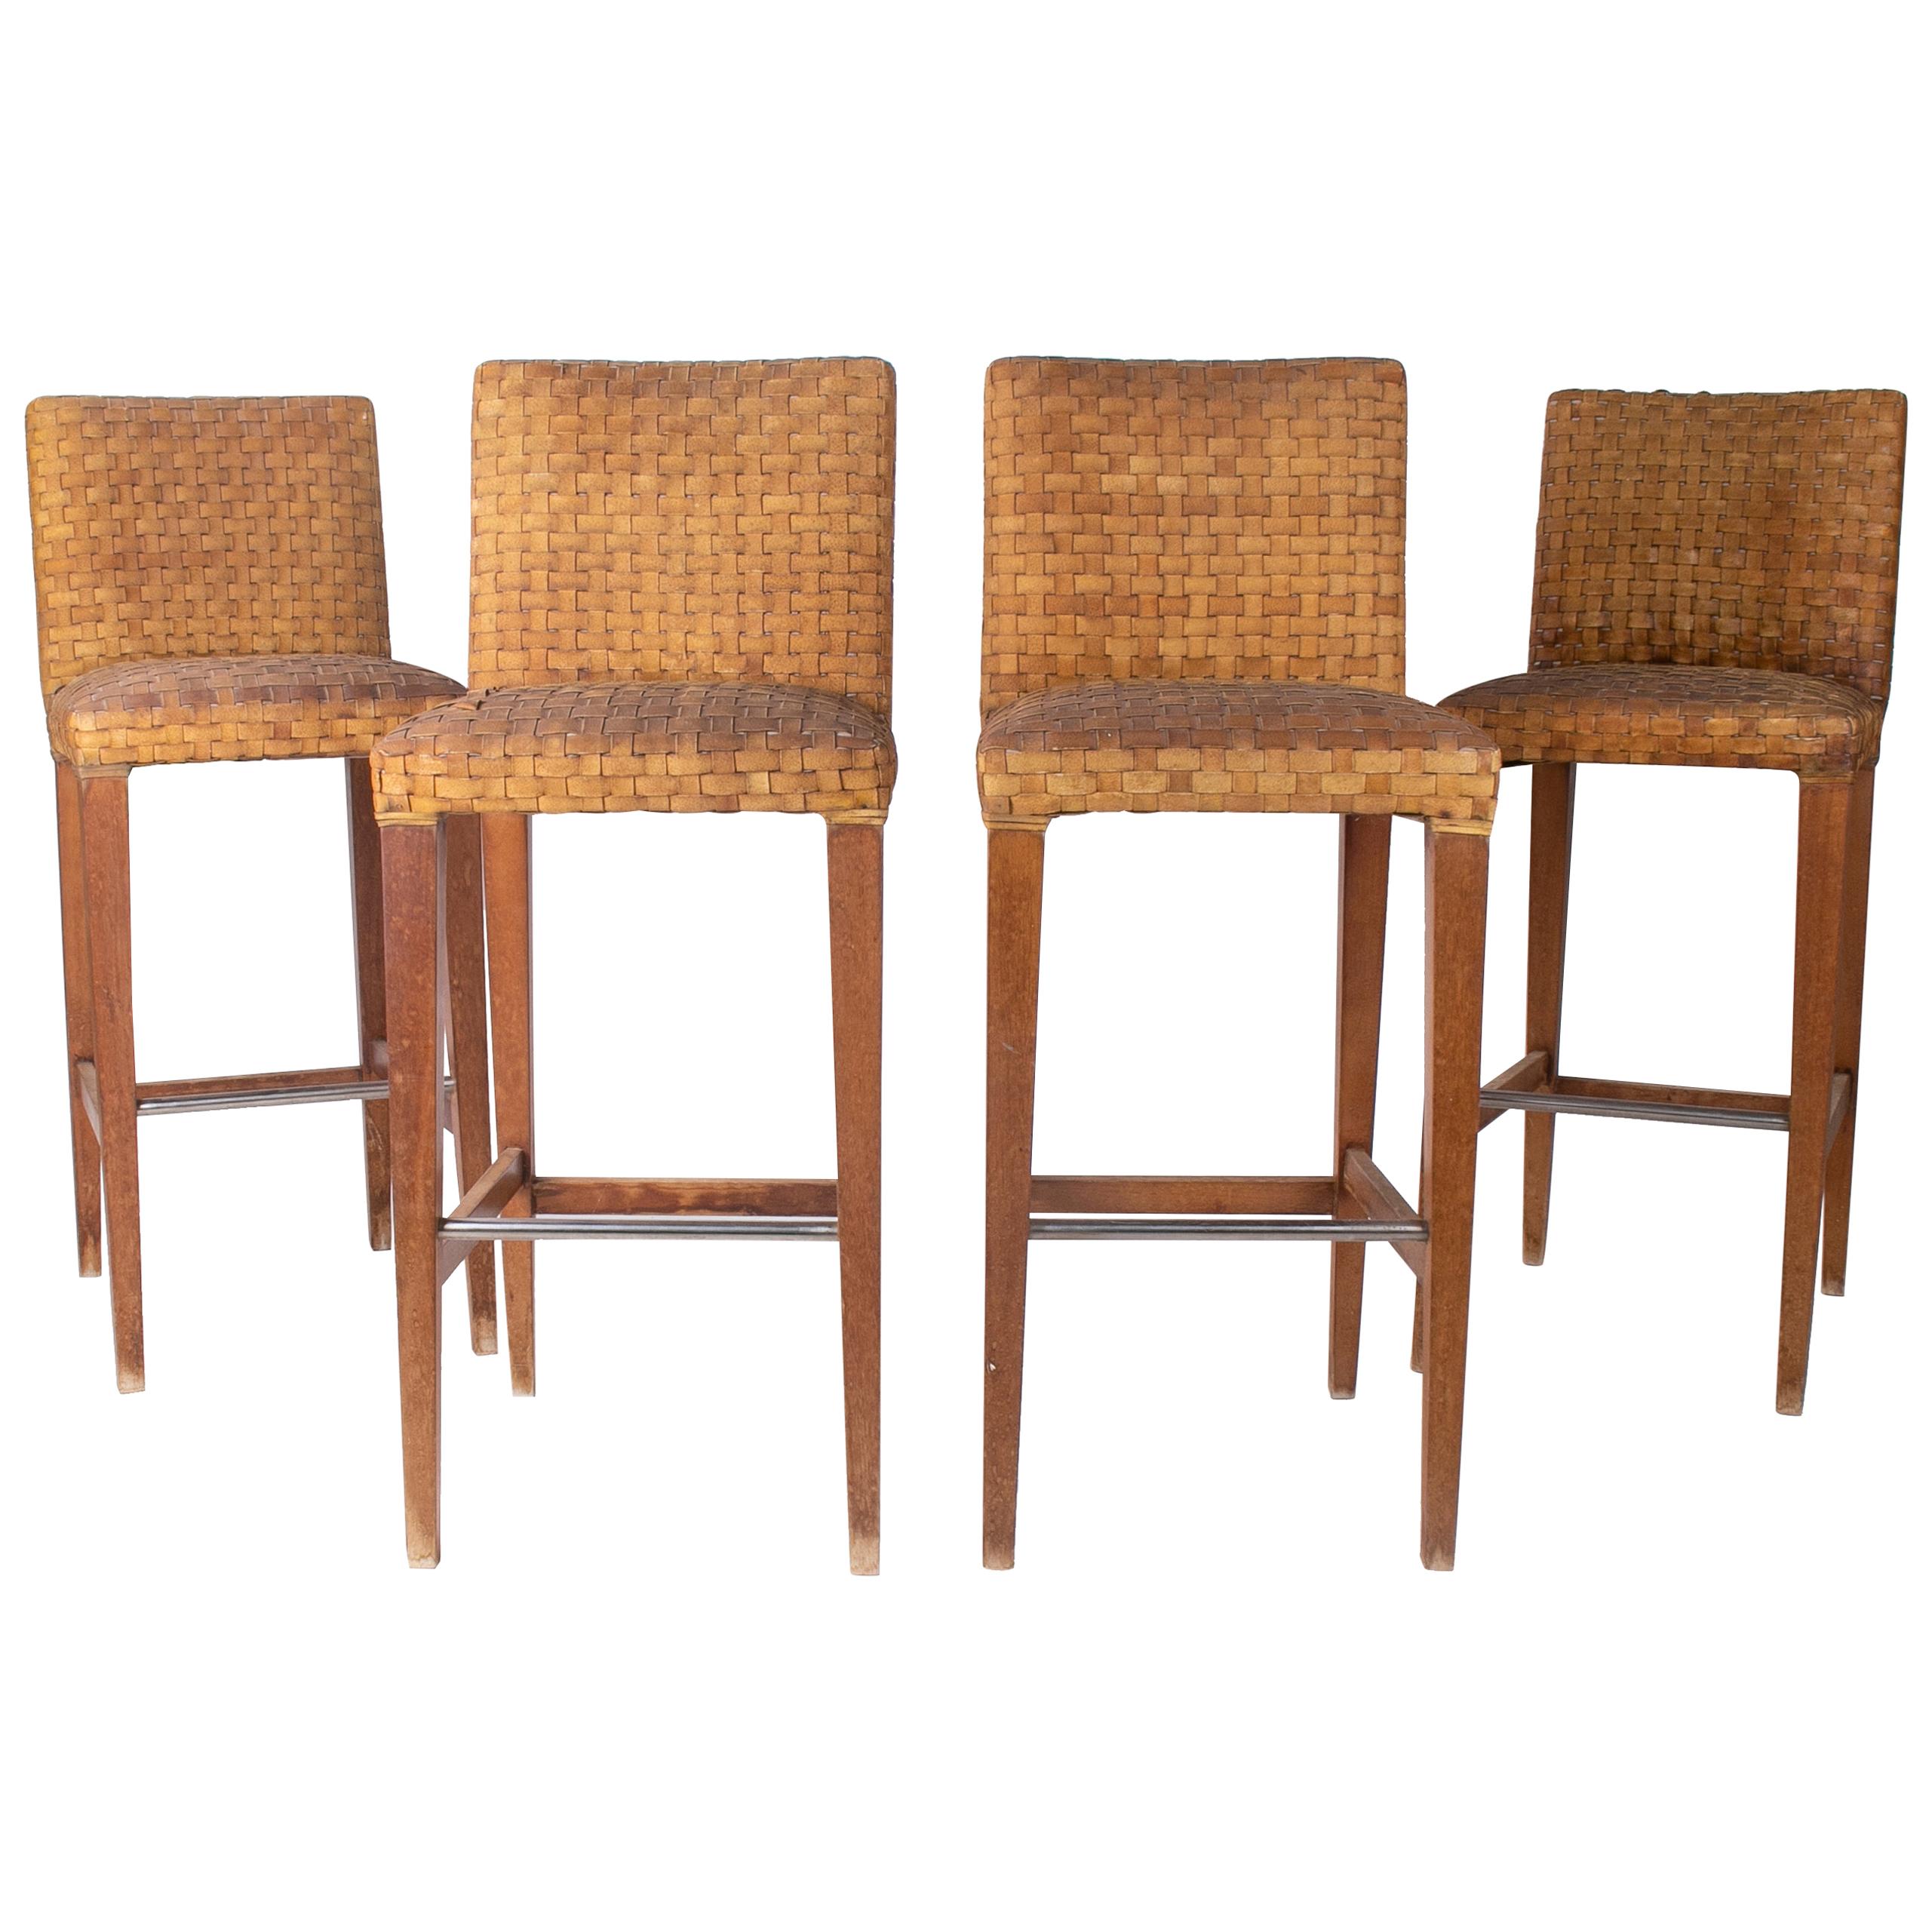 1990s Set of Four Wood and Leather Stools with Steel Foot Rests